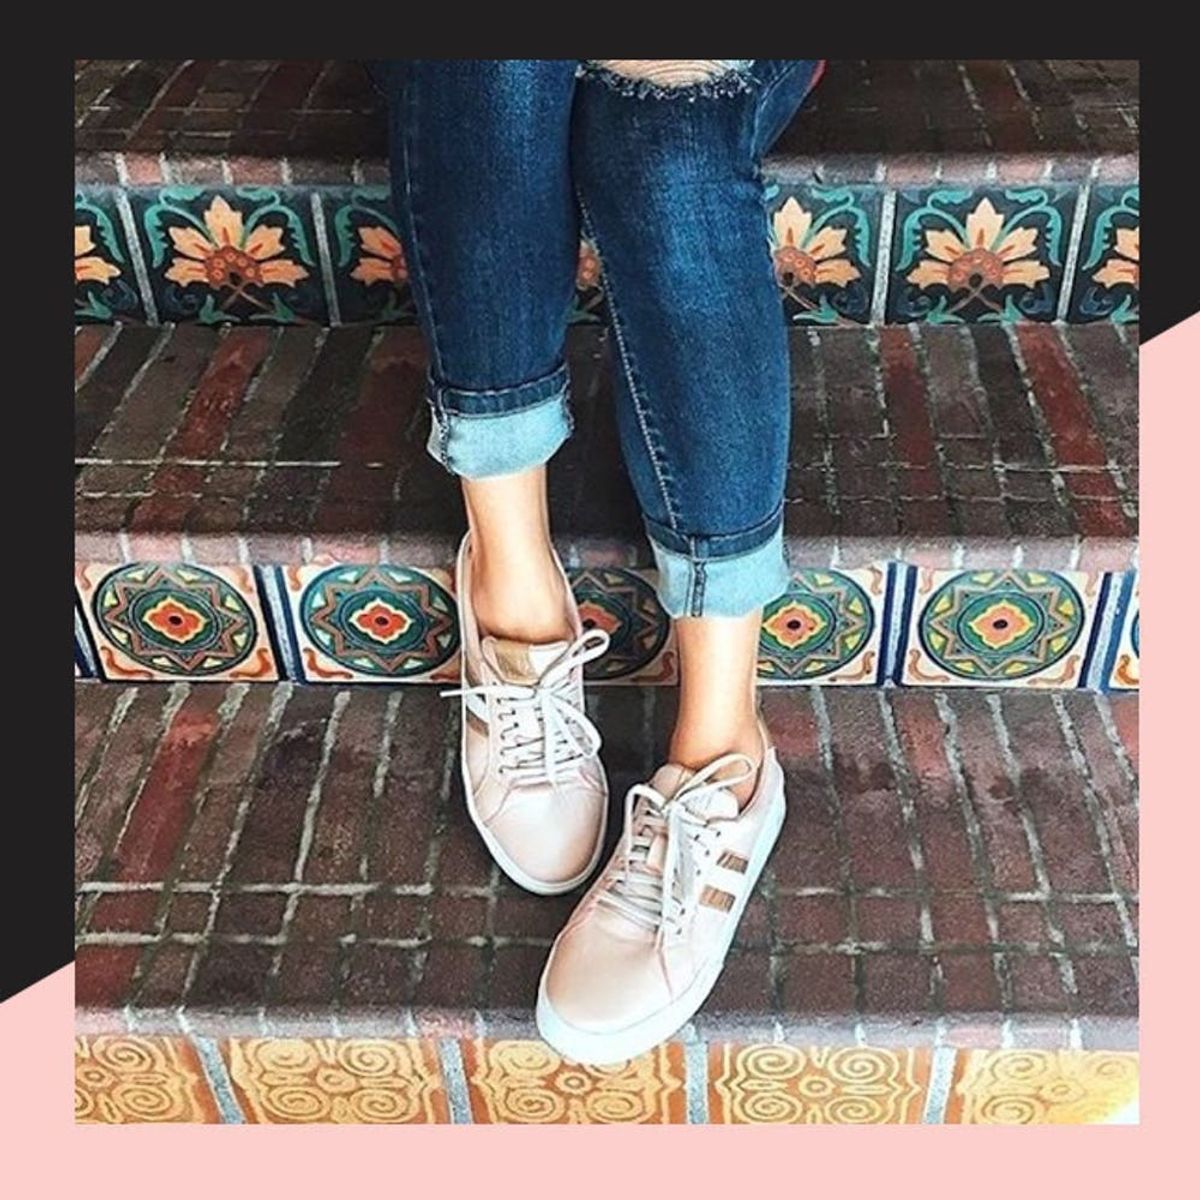 It’s Official: Everyone’s Obsessed With Rose Gold Sneakers